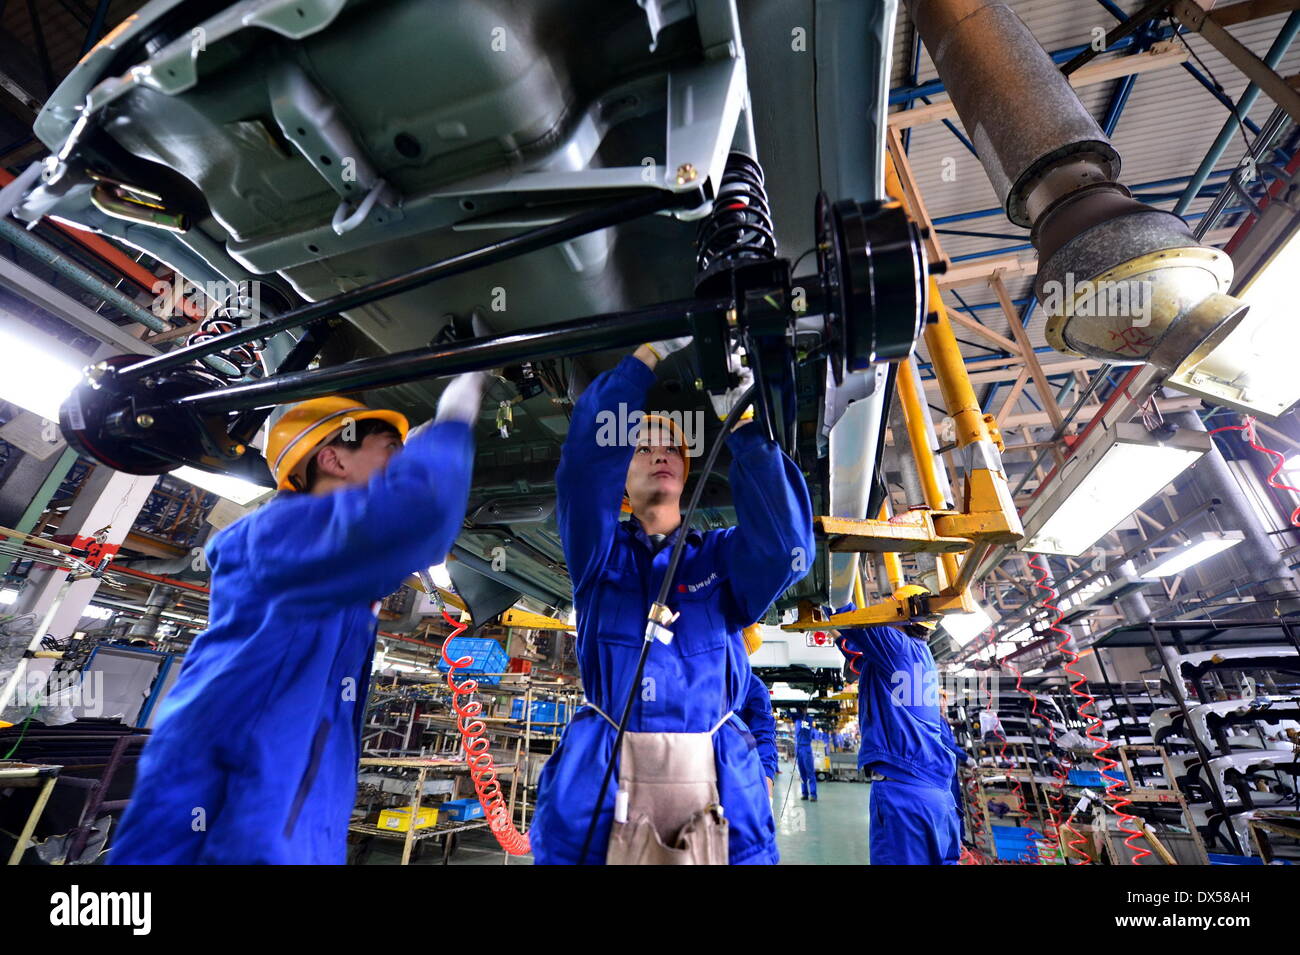 Nanchang, China. 18 March 2014. Workers work on an assembly line in Changhe Automobile Co. in east China's Jiangxi Province, March 12, 2014. In 2013, Beijing Automotive Group (BAIC), China's fifth-largest auto maker by sales, signed an agreement to pay about 80 million yuan (13 million U.S. dollars) for a 70-percent stake in Changhe Auto. The Jiangxi-based automaker expects to expand its yield capacity to 180,000 units in 2014, rising 60 percent year-on-year. © Xinhua/Alamy Live News Stock Photo